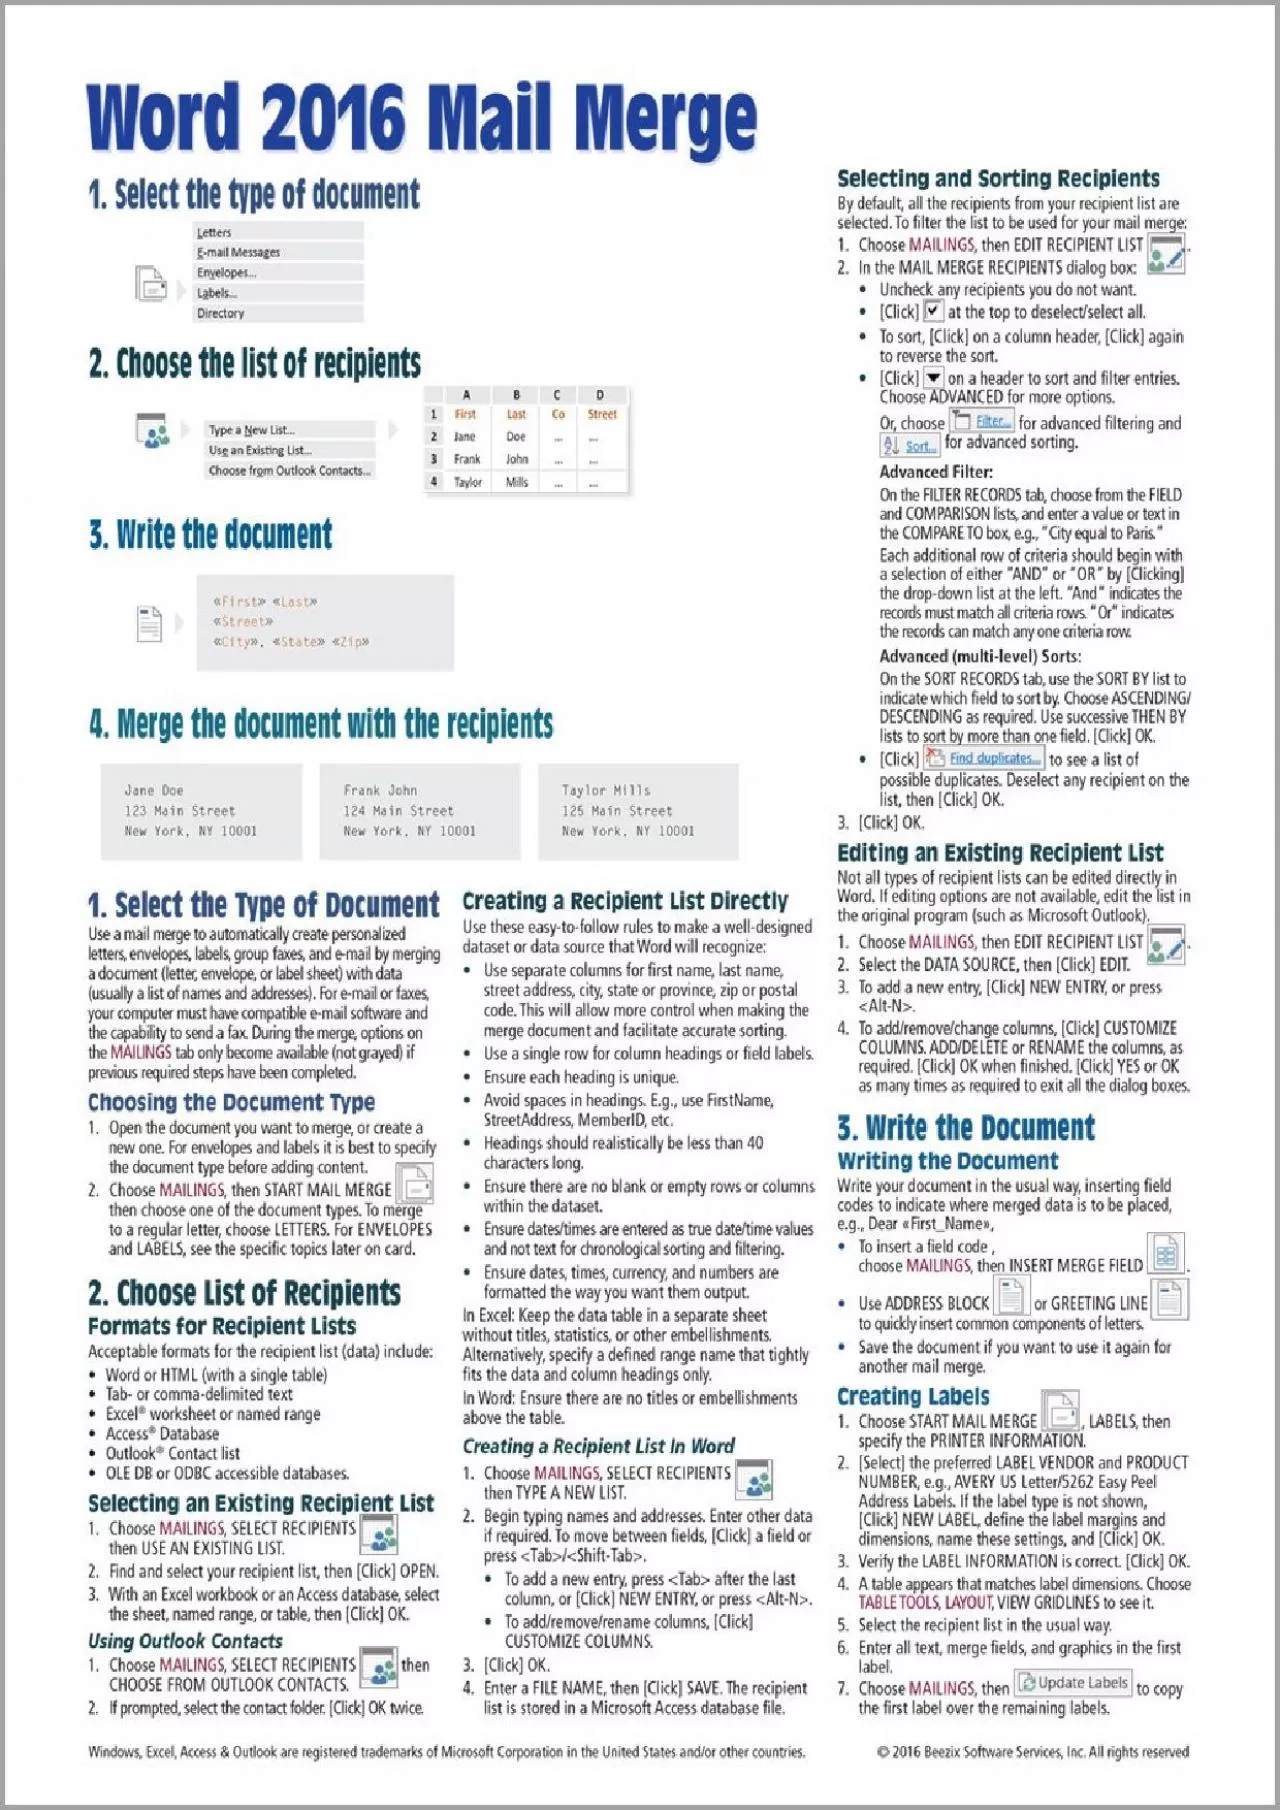 (BOOK)-Microsoft Word 2016 Mail Merge Quick Reference Guide - Windows Version (Cheat Sheet